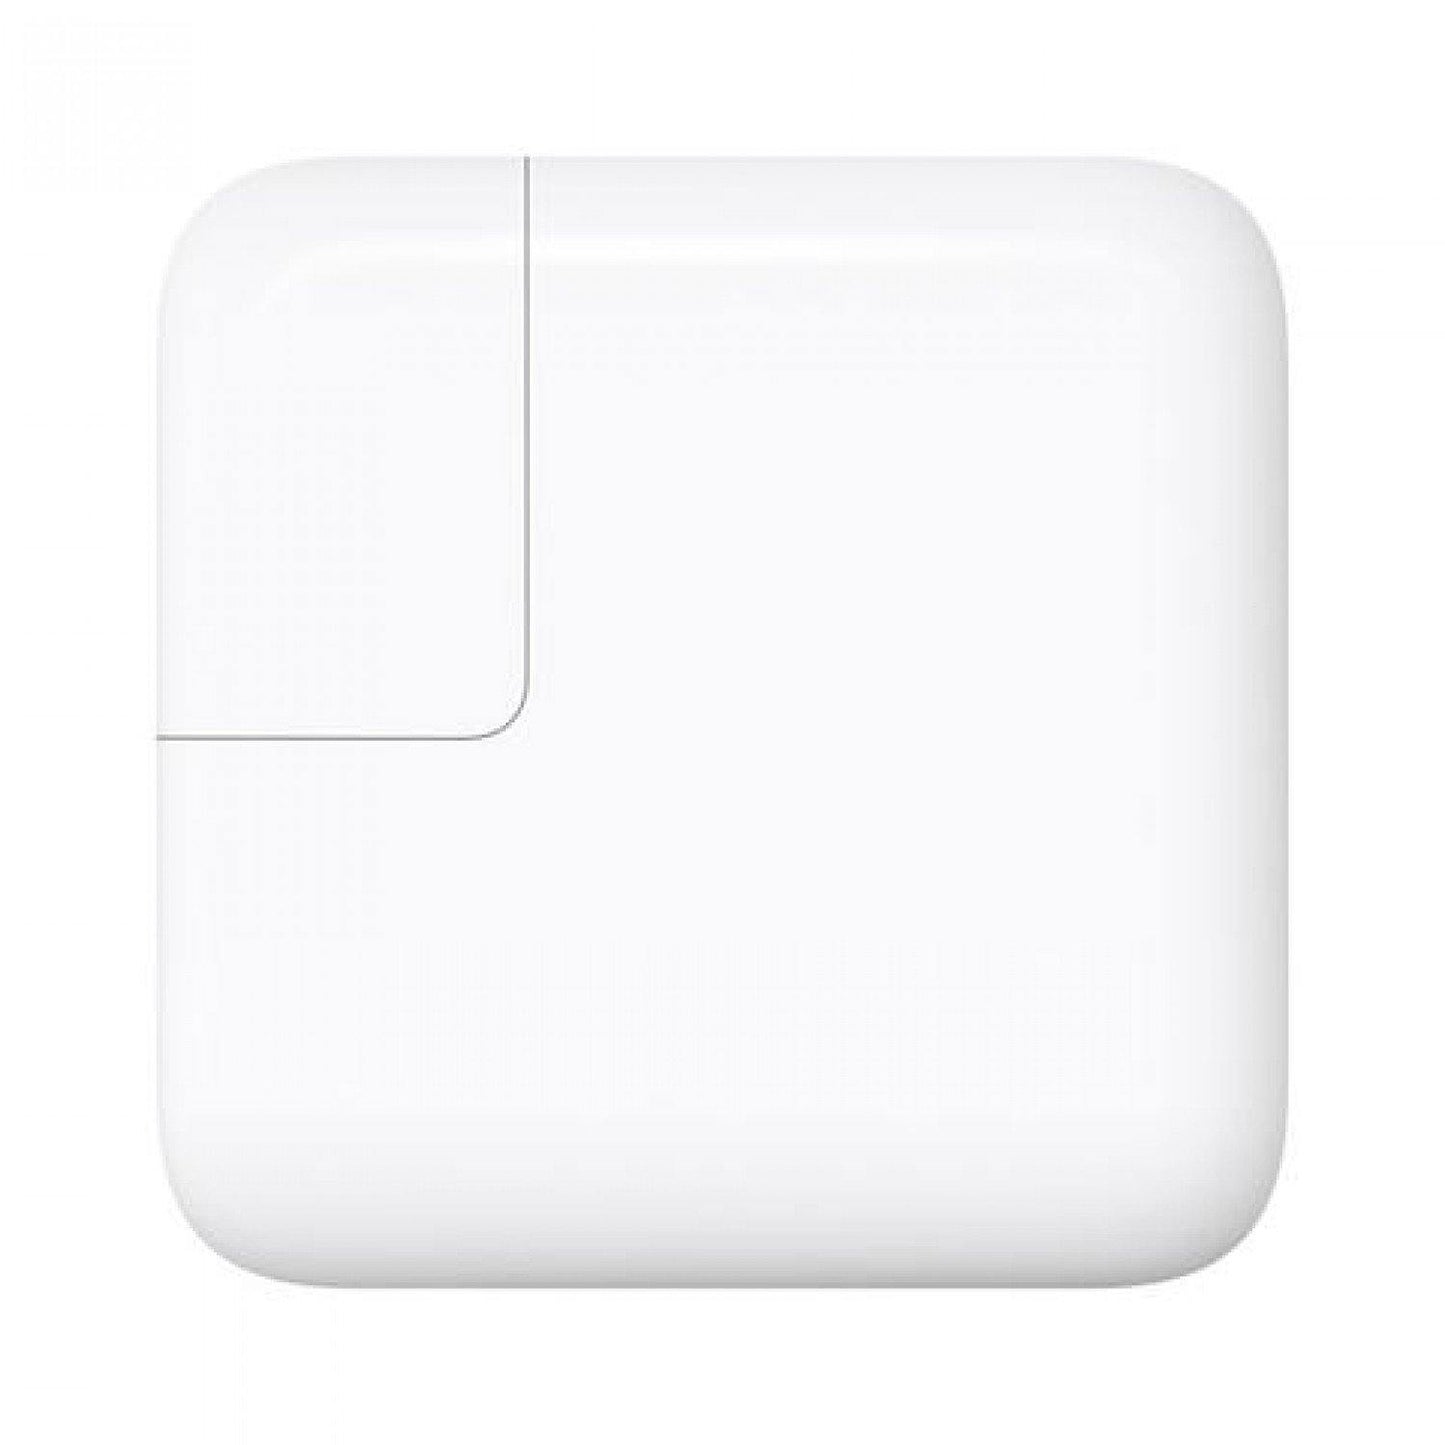 USB-C Power Charger Adapter for Apple - PCMaster Pro 